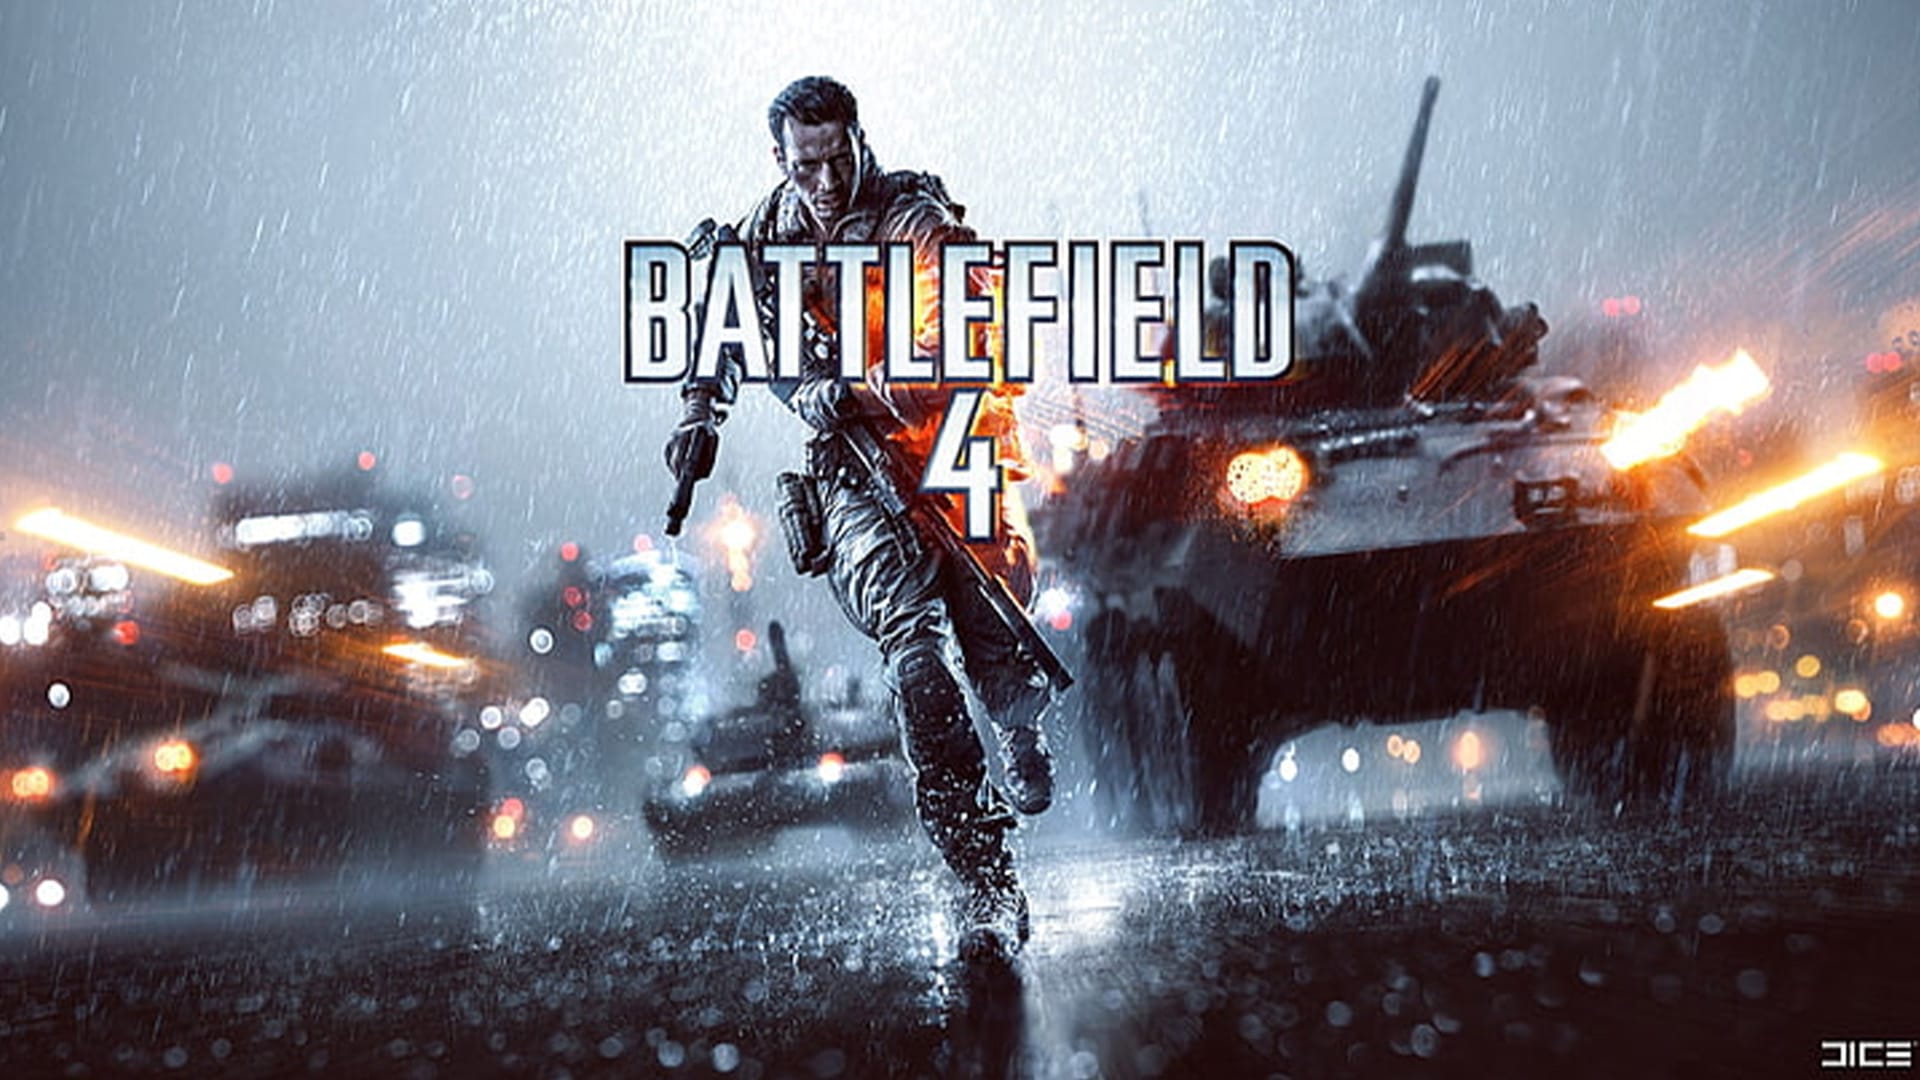 What is the current player count for Battlefield 4 and Battlefield 5?